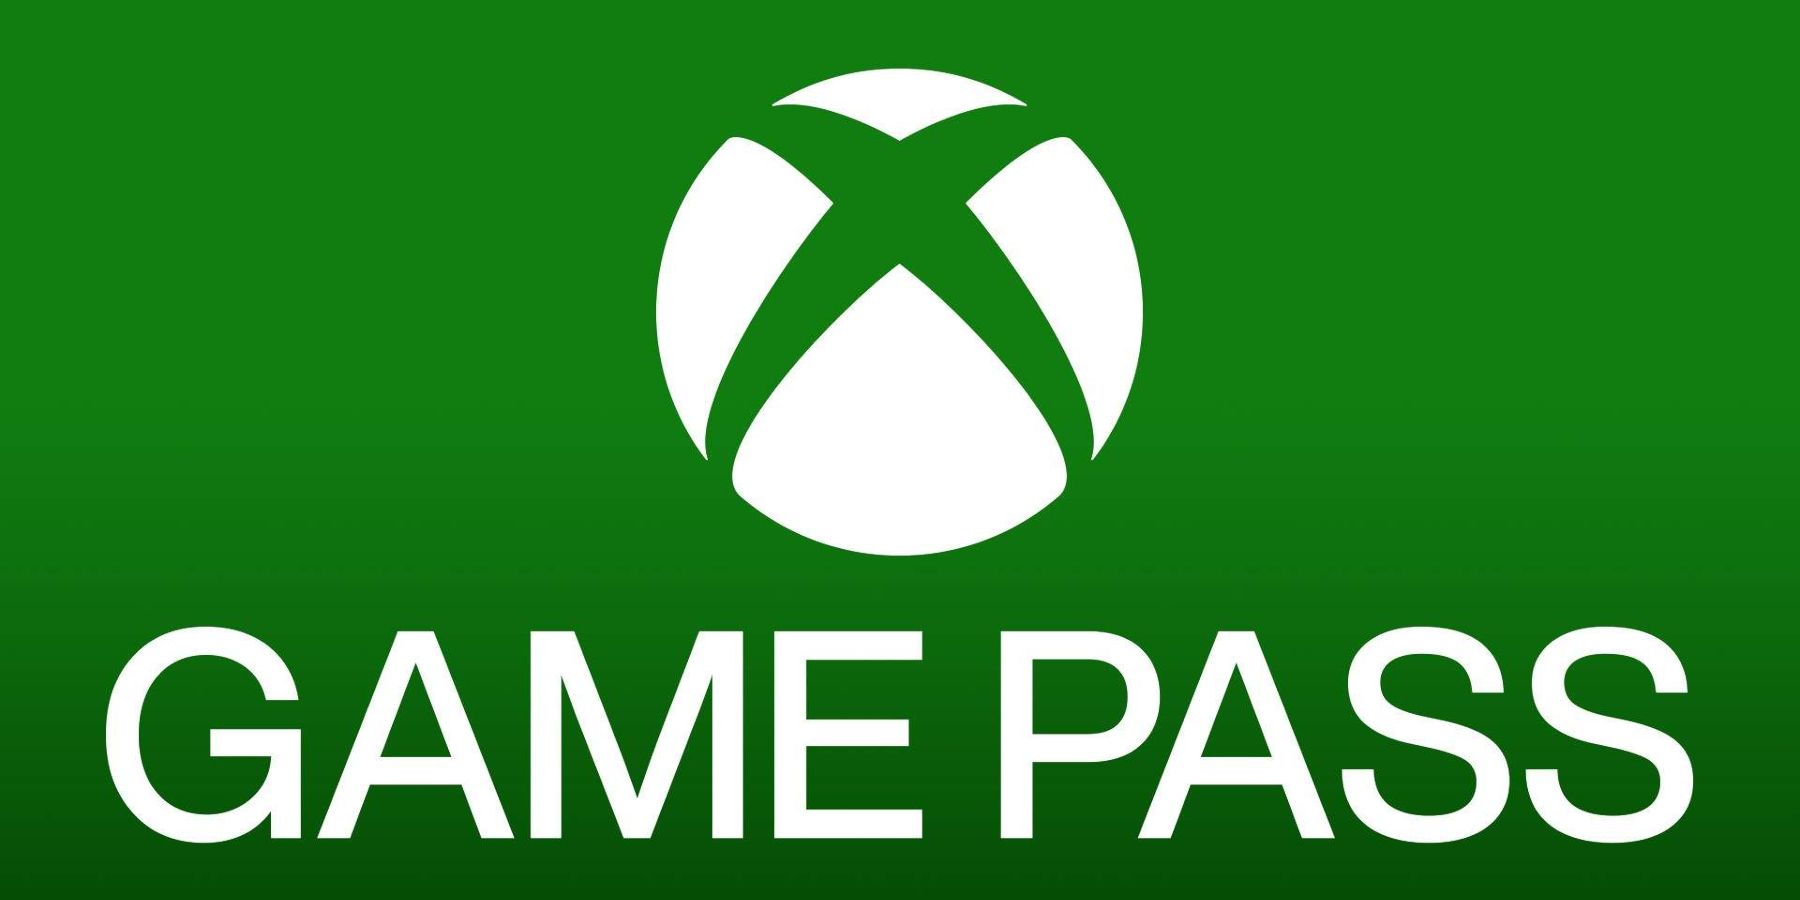 OPDATERING: Xbox Game Pass-abonnenter på 30 millioner, siger Take-Two CEO